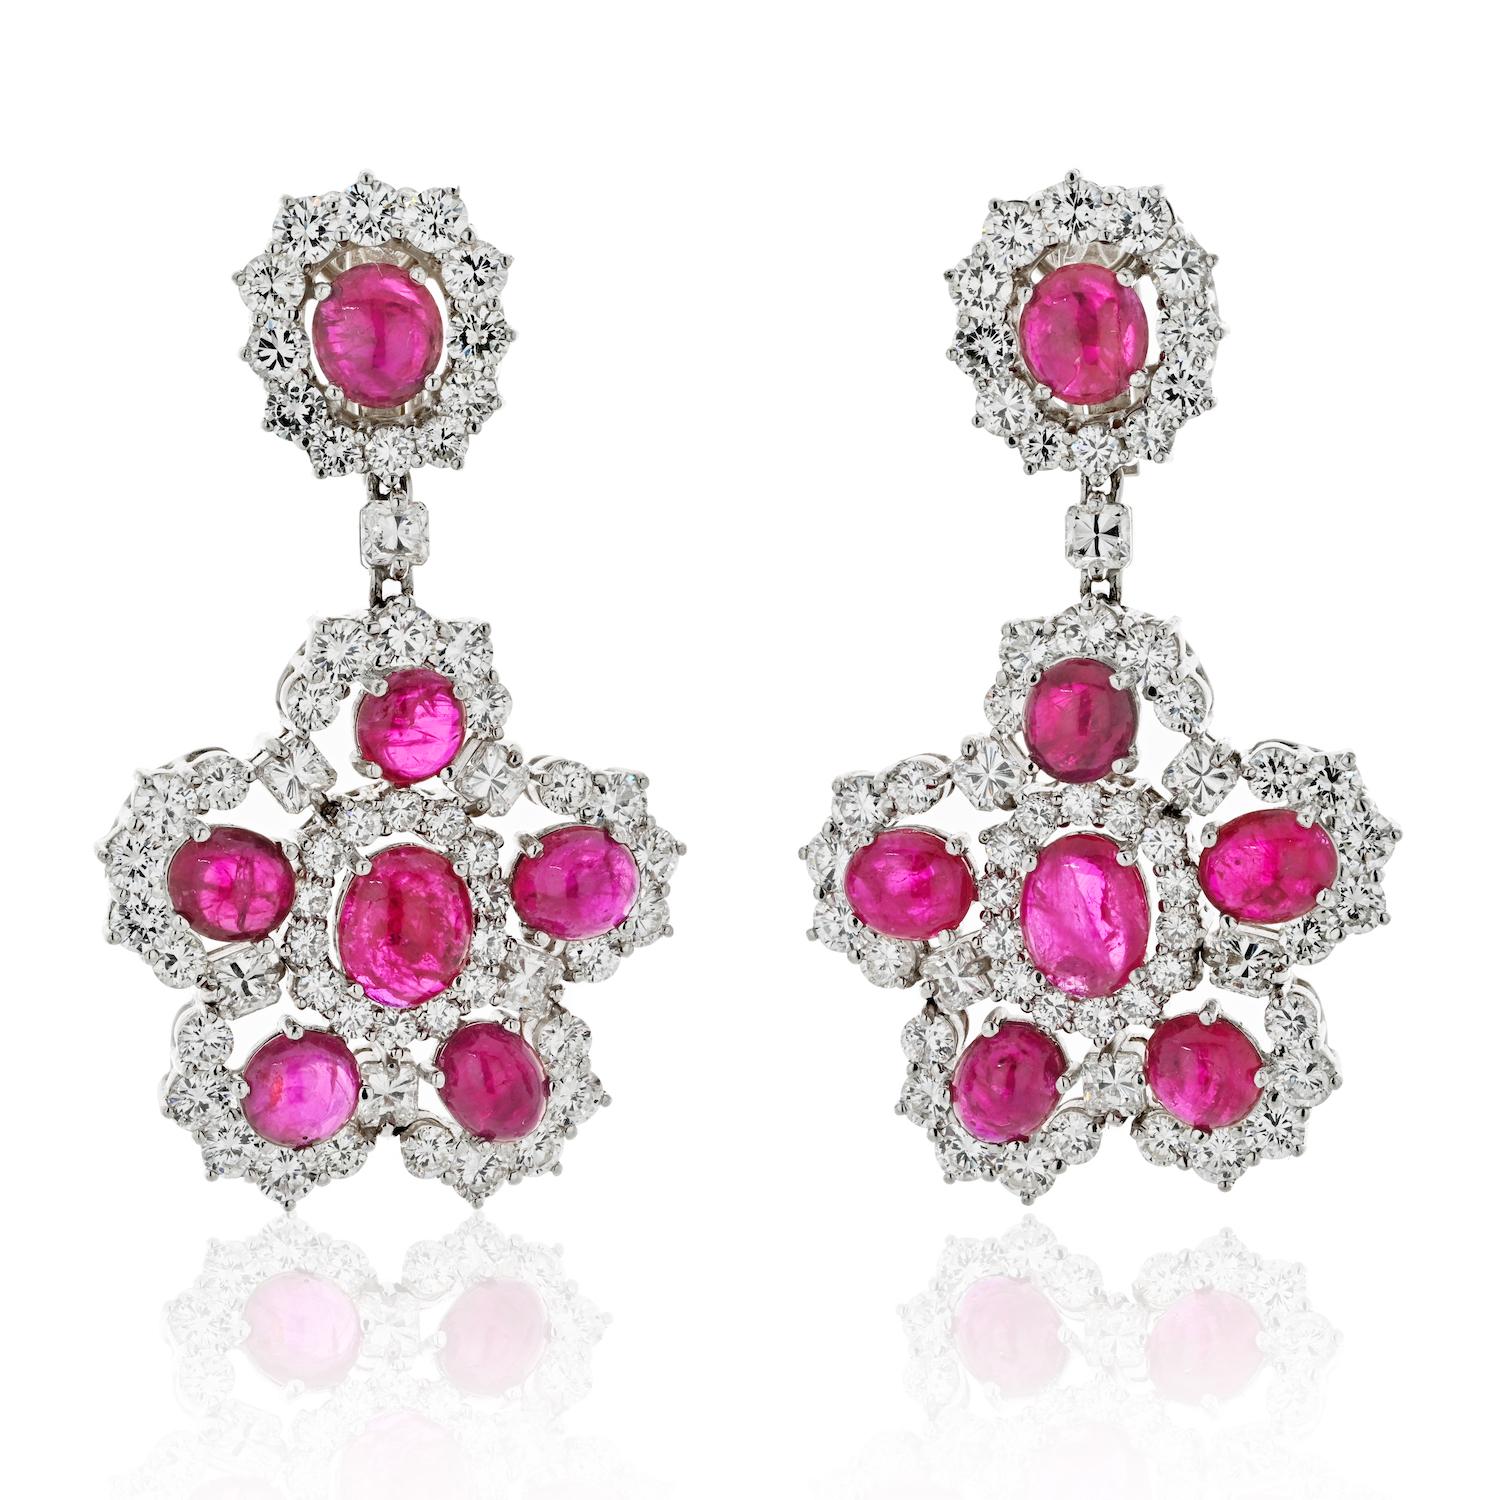 Platinum Ruby And Diamond Statement Dangling Earrings.

Diamond and ruby chandelier earrings in platinum are a stunning combination of precious stones and metal. The platinum setting provides a brilliant backdrop for the diamonds and rubies, which